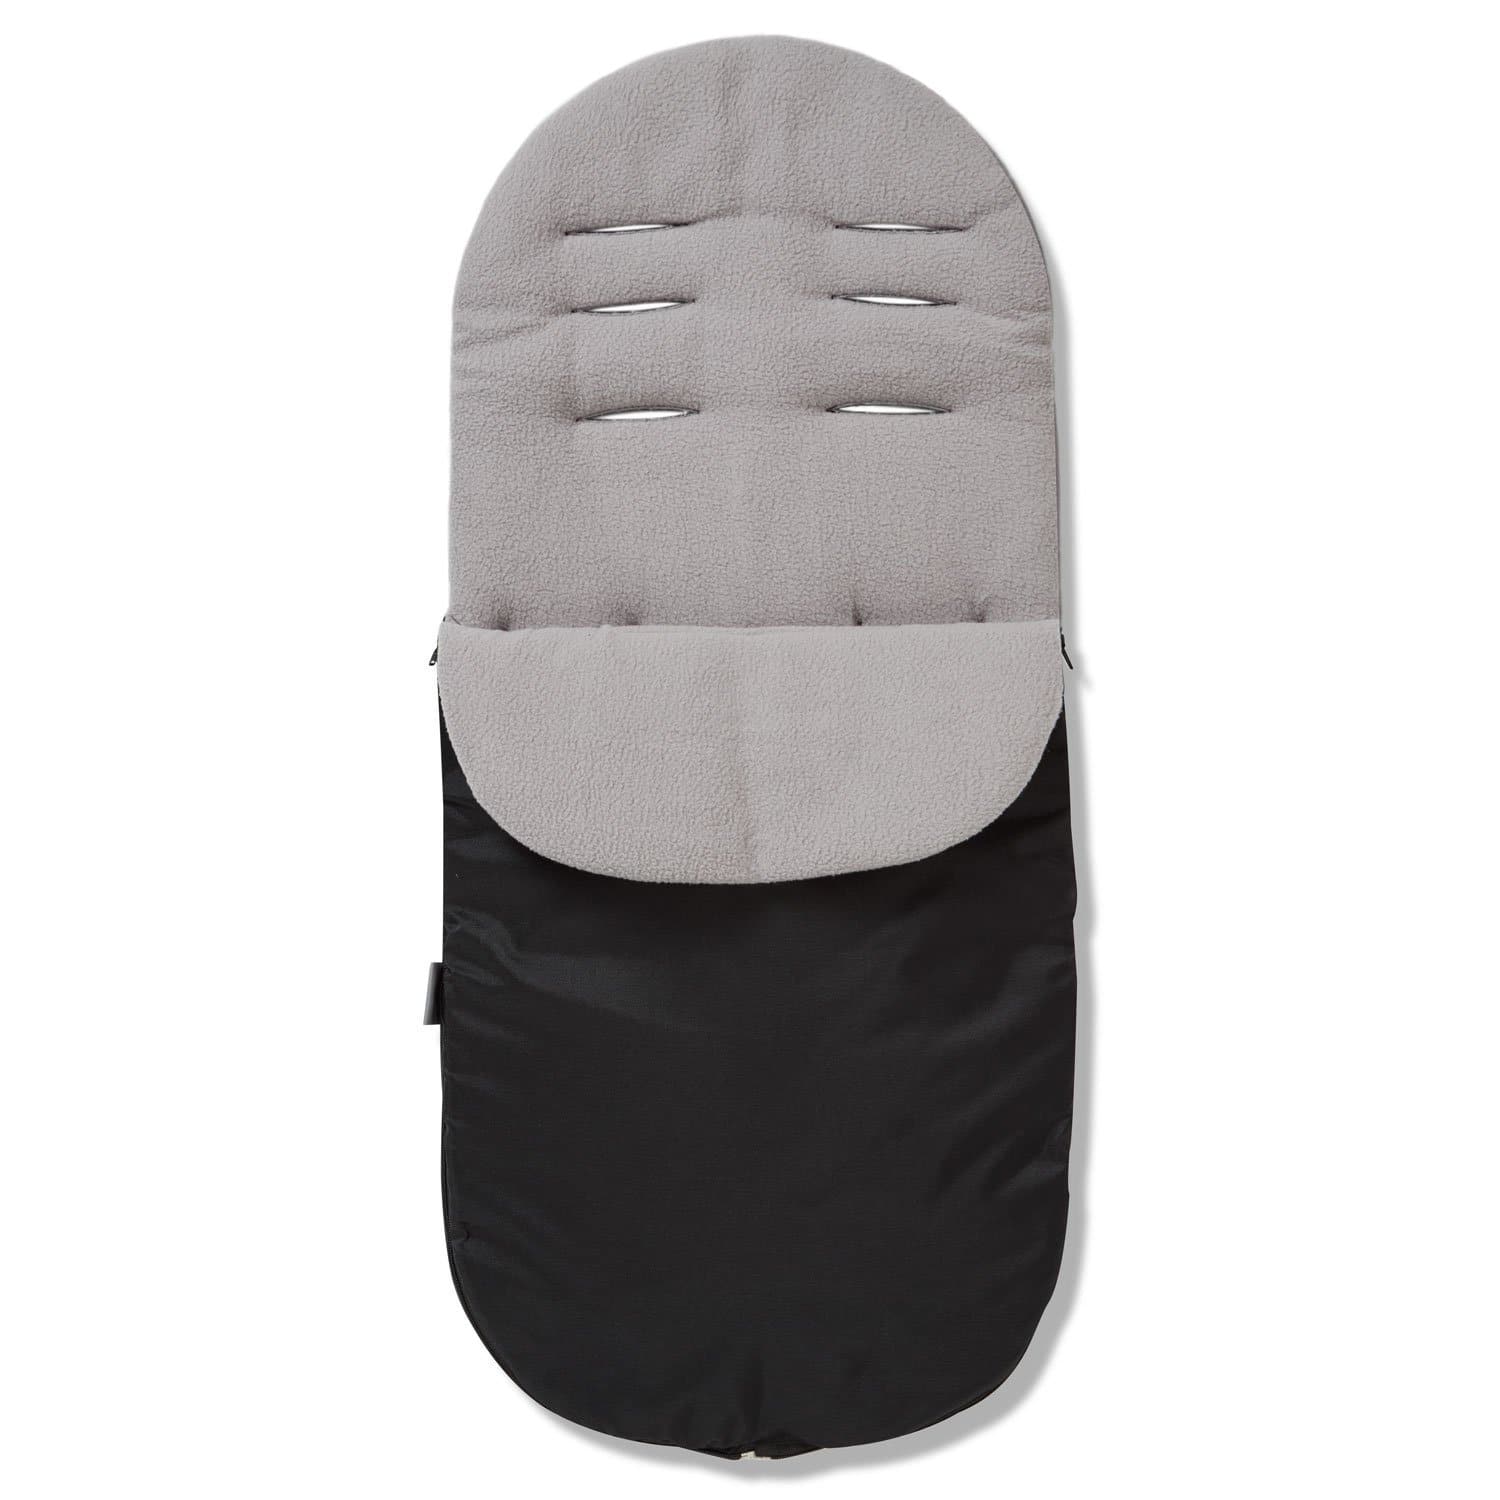 Footmuff / Cosy Toes Compatible with Excel - Grey / Fits All Models | For Your Little One